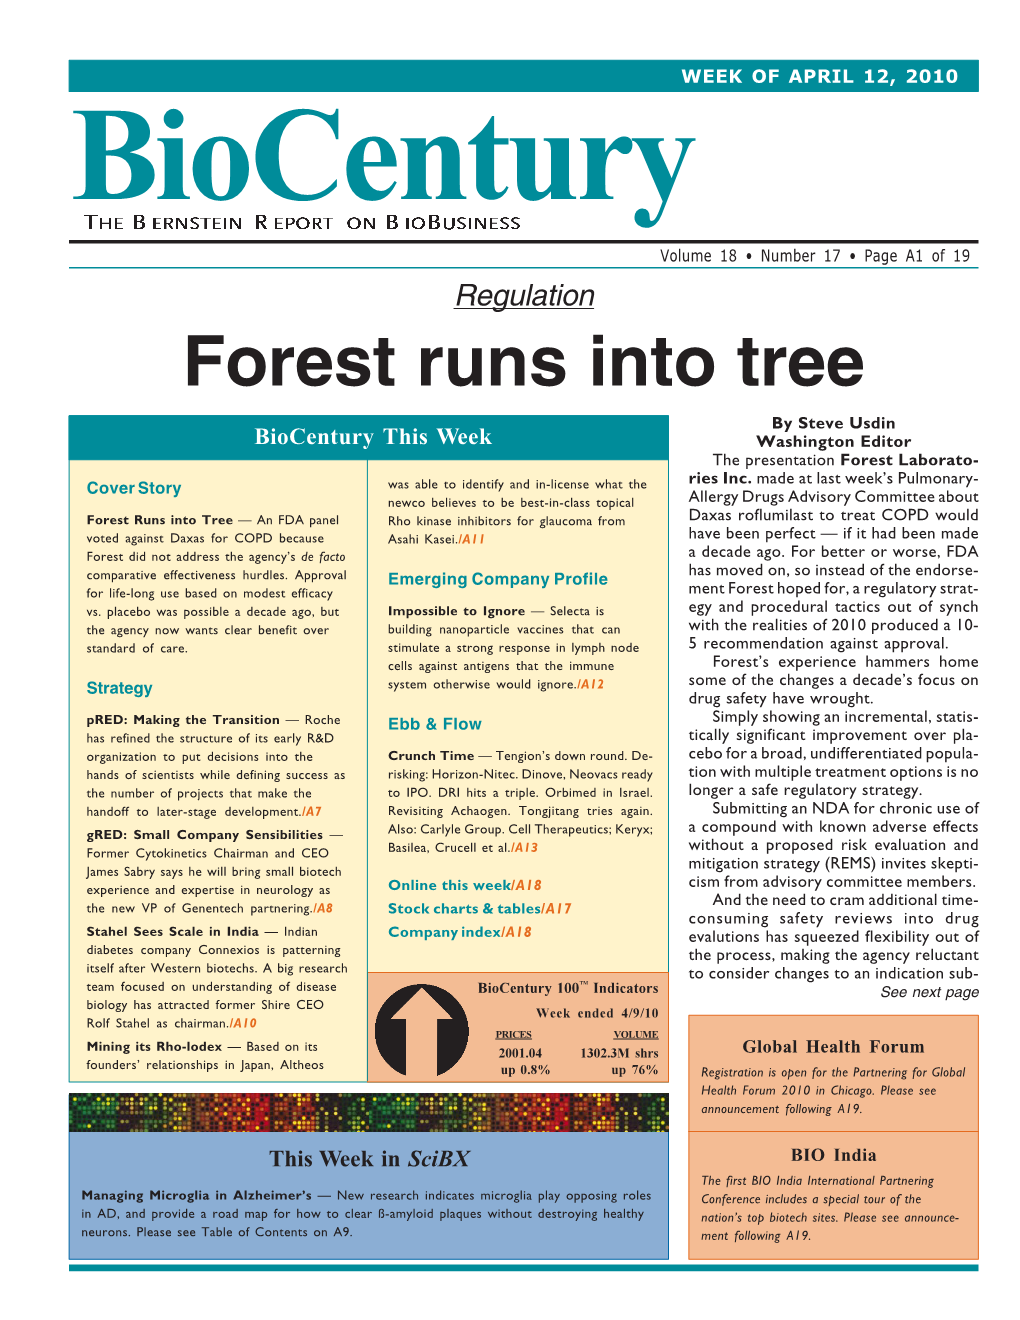 Forest Runs Into Tree by Steve Usdin Biocentury This Week Washington Editor the Presentation Forest Laborato- Ries Inc